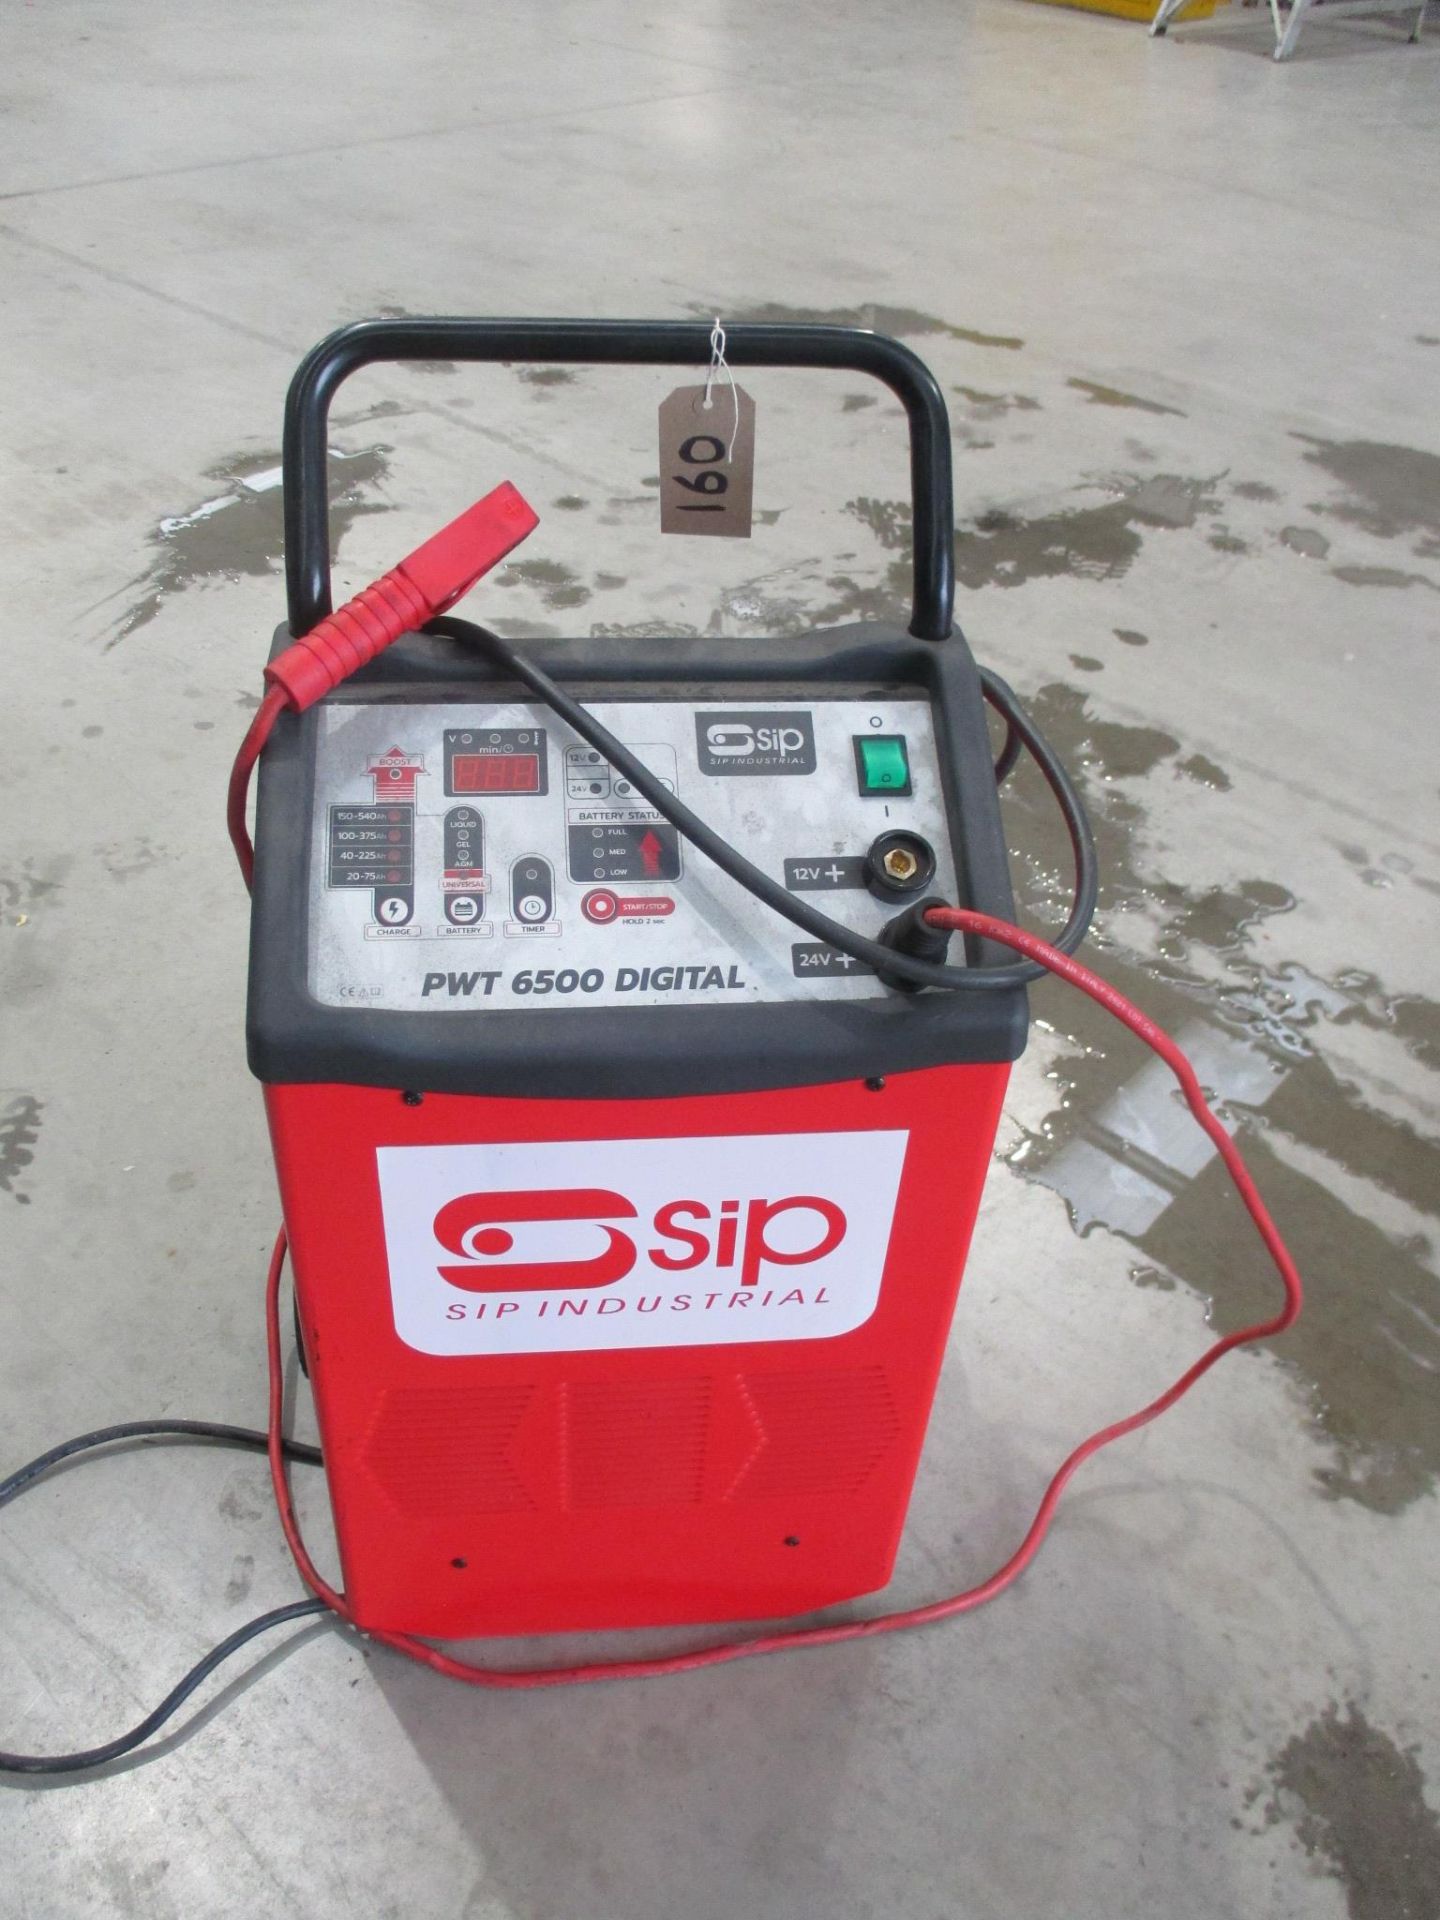 SIP Industrial Digital Battery Charger